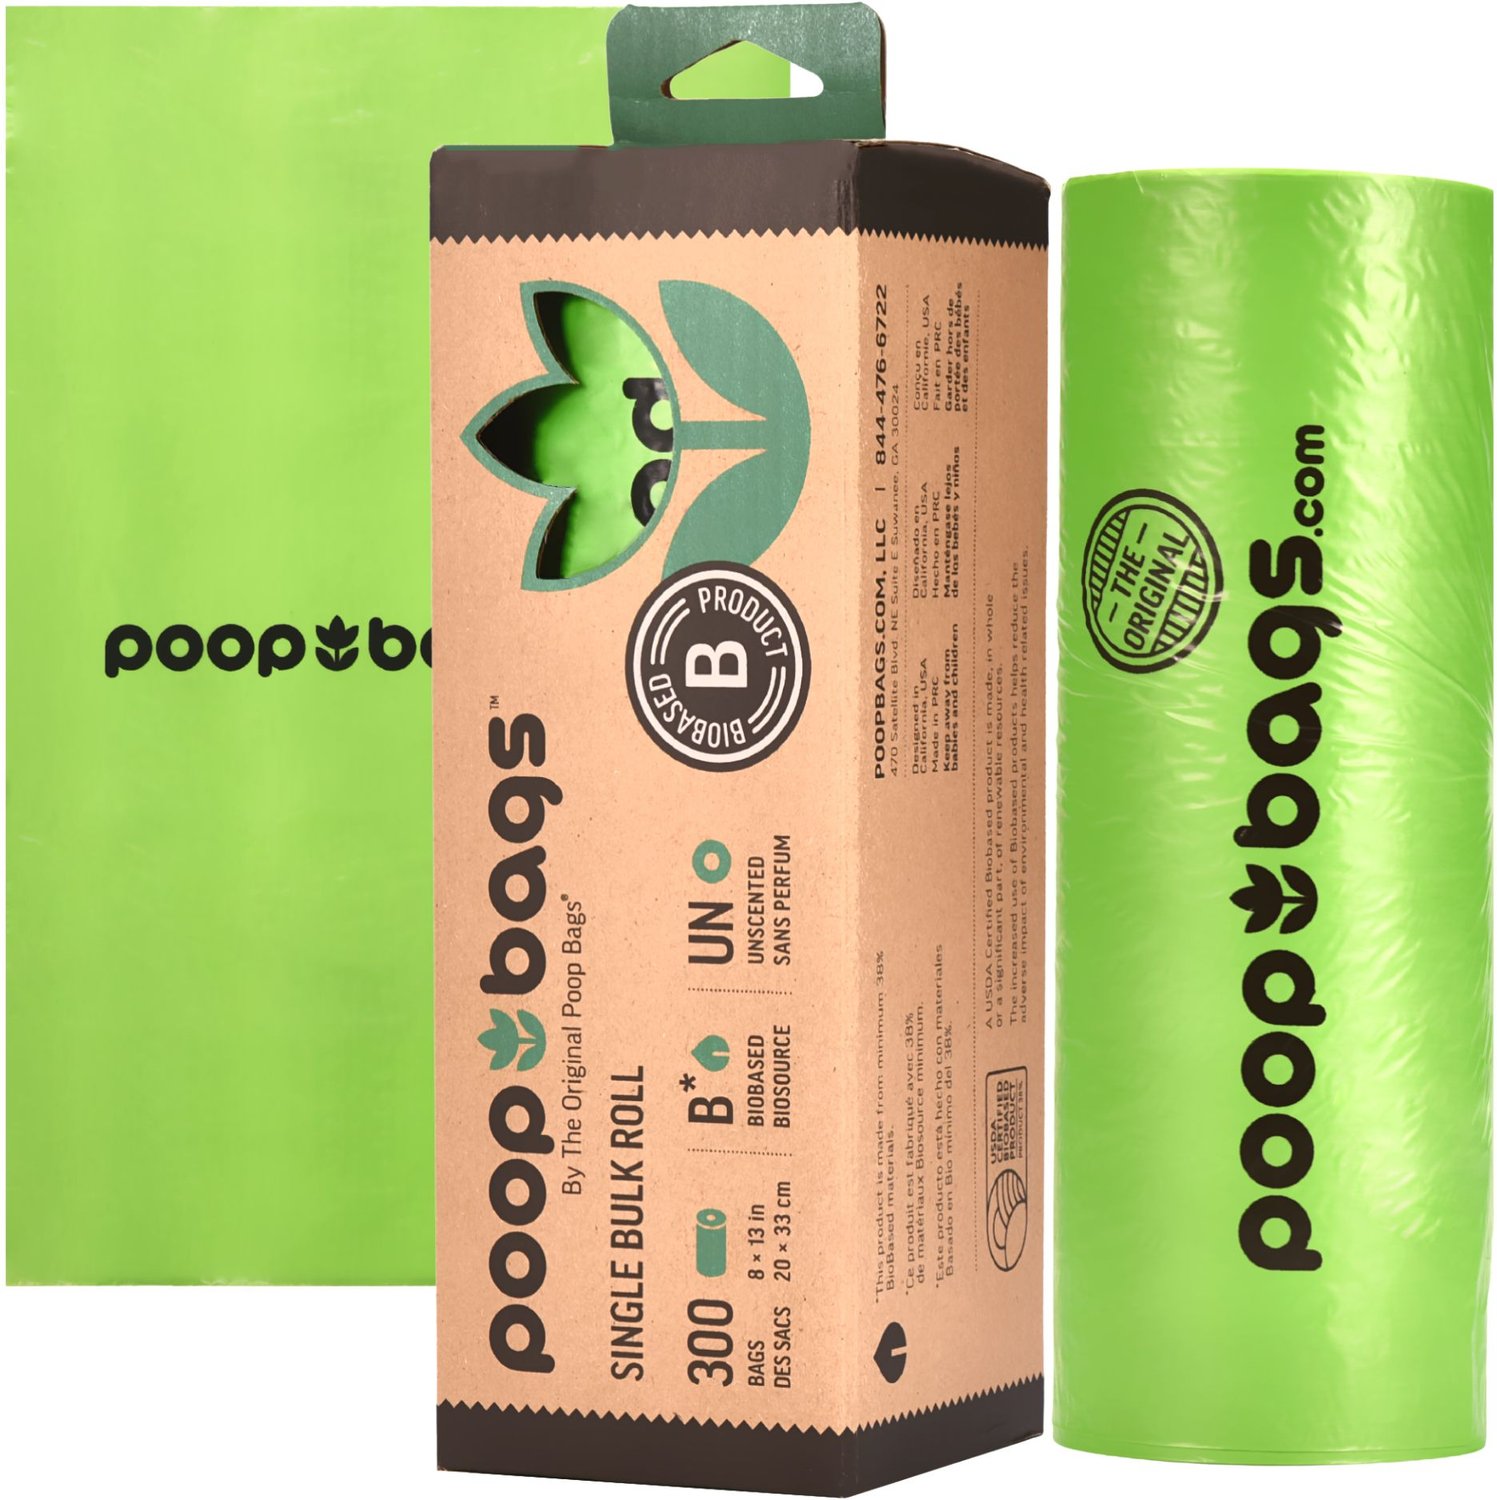 Pogi's Dog Poop Bags with Easy-Tie Handles - 300 Doggy Leak-Proof, Ultra  Thick, Scented Poop Bags for Dogs, Cat